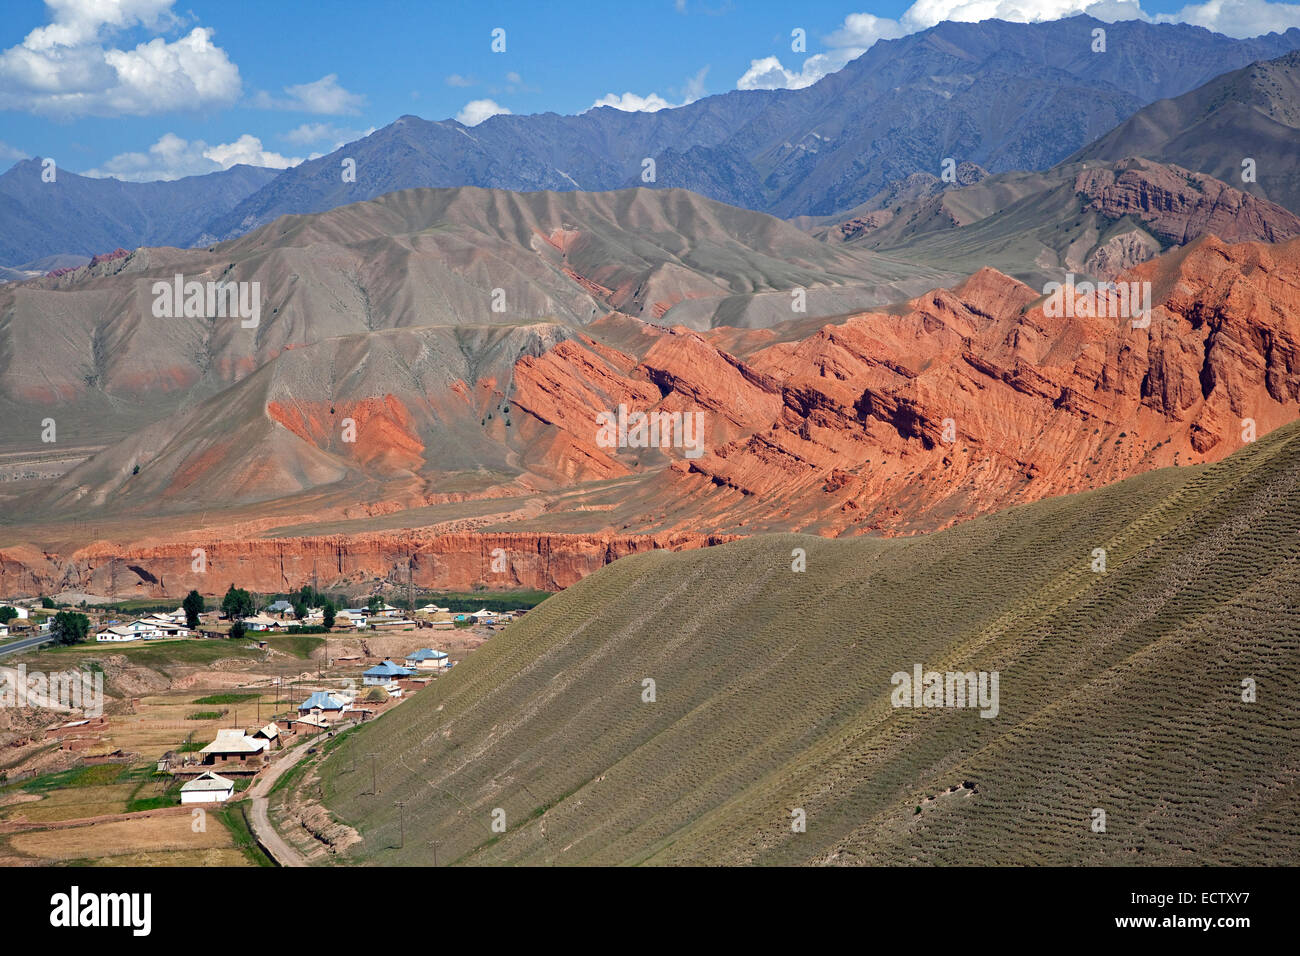 Village among colourful mountains, foothills of the Himalayas in the Osh Province, Kyrgyzstan Stock Photo